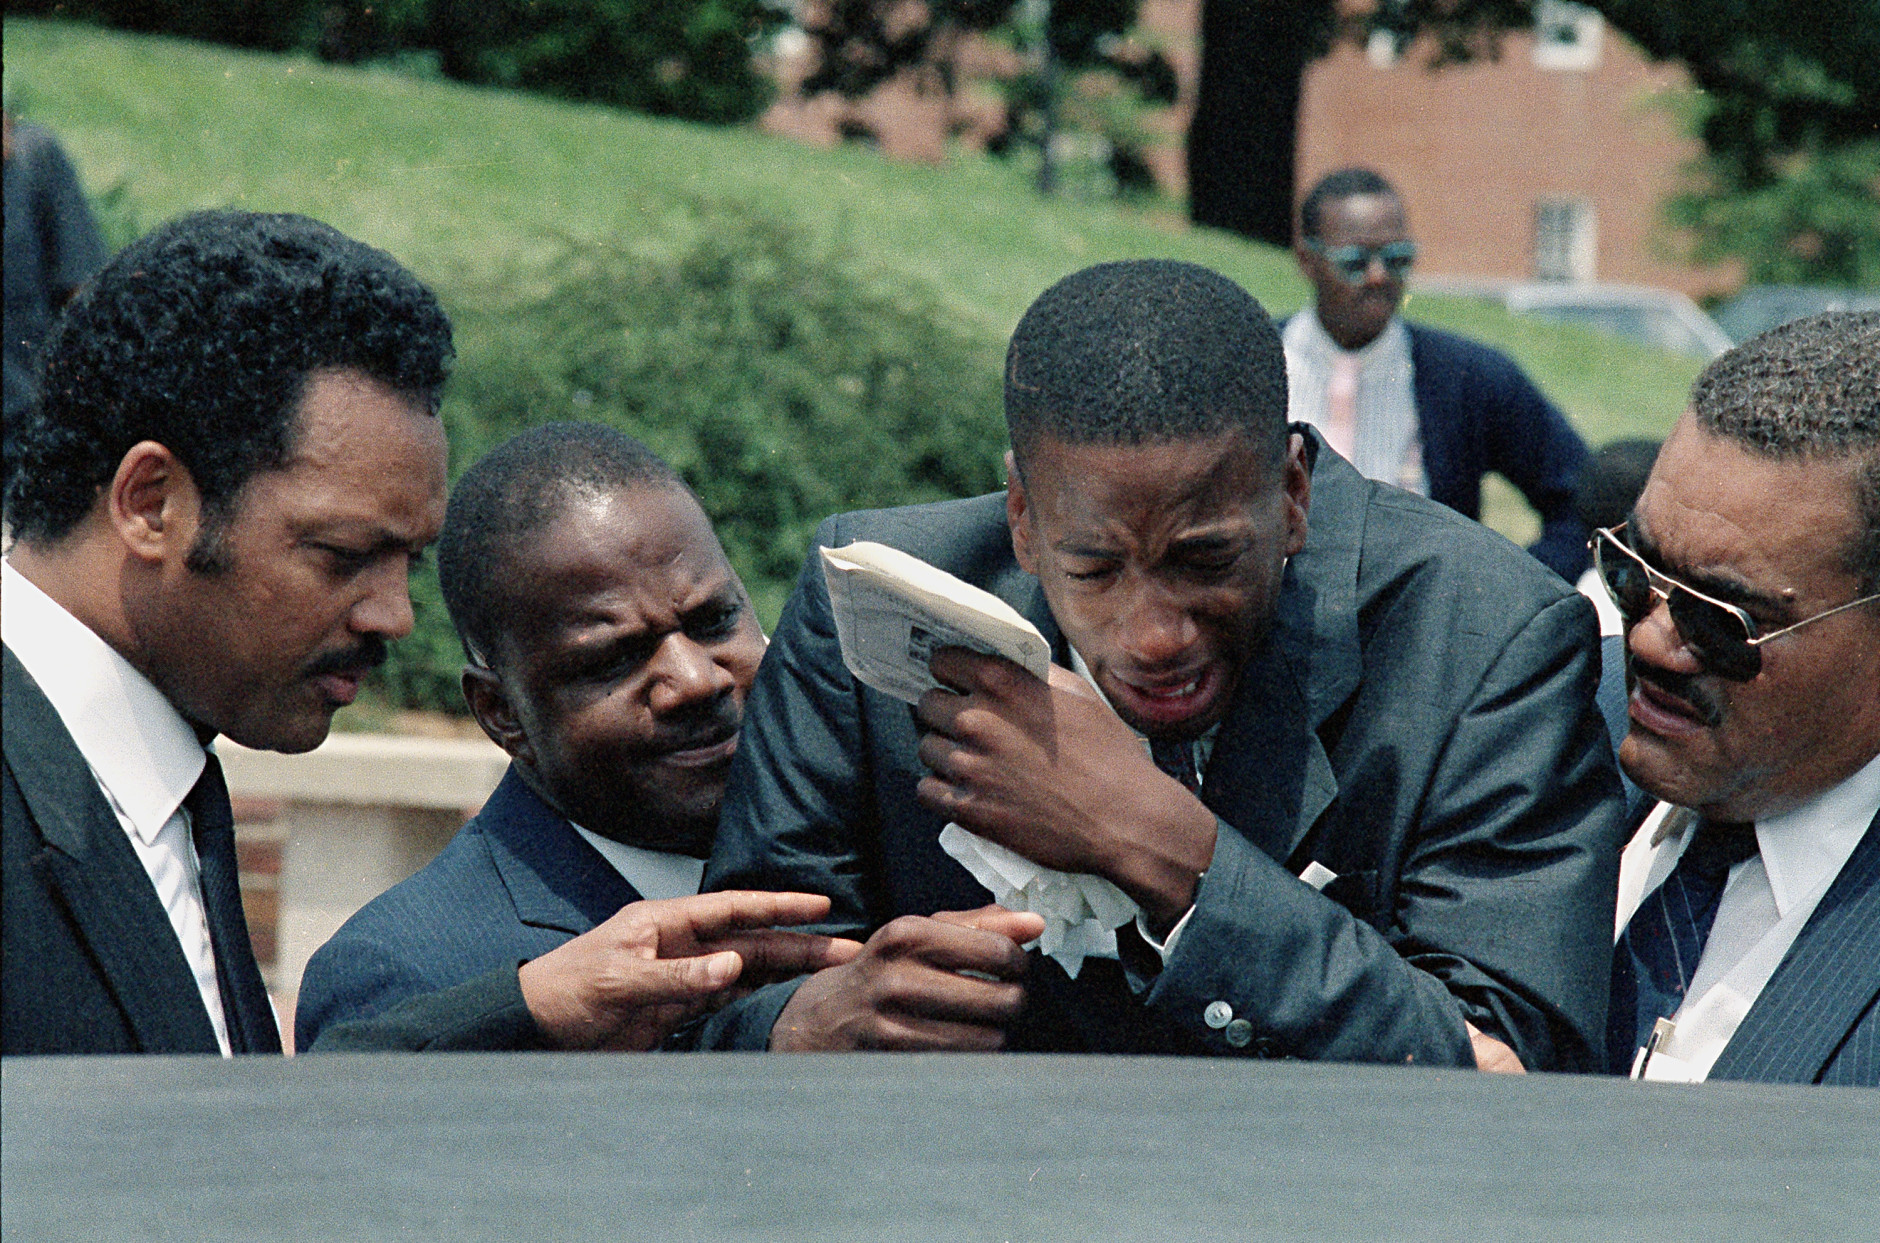 James Bias, Jr., right, brother of Len Bias, is comforted by his father James Bias and the Rev. Jesse Jackson after a private funeral service for the college basketball star at the University of Maryland, June 23, 1986.  Bias died of a heart attack on Thursday.  (AP Photo/Bill Smith)